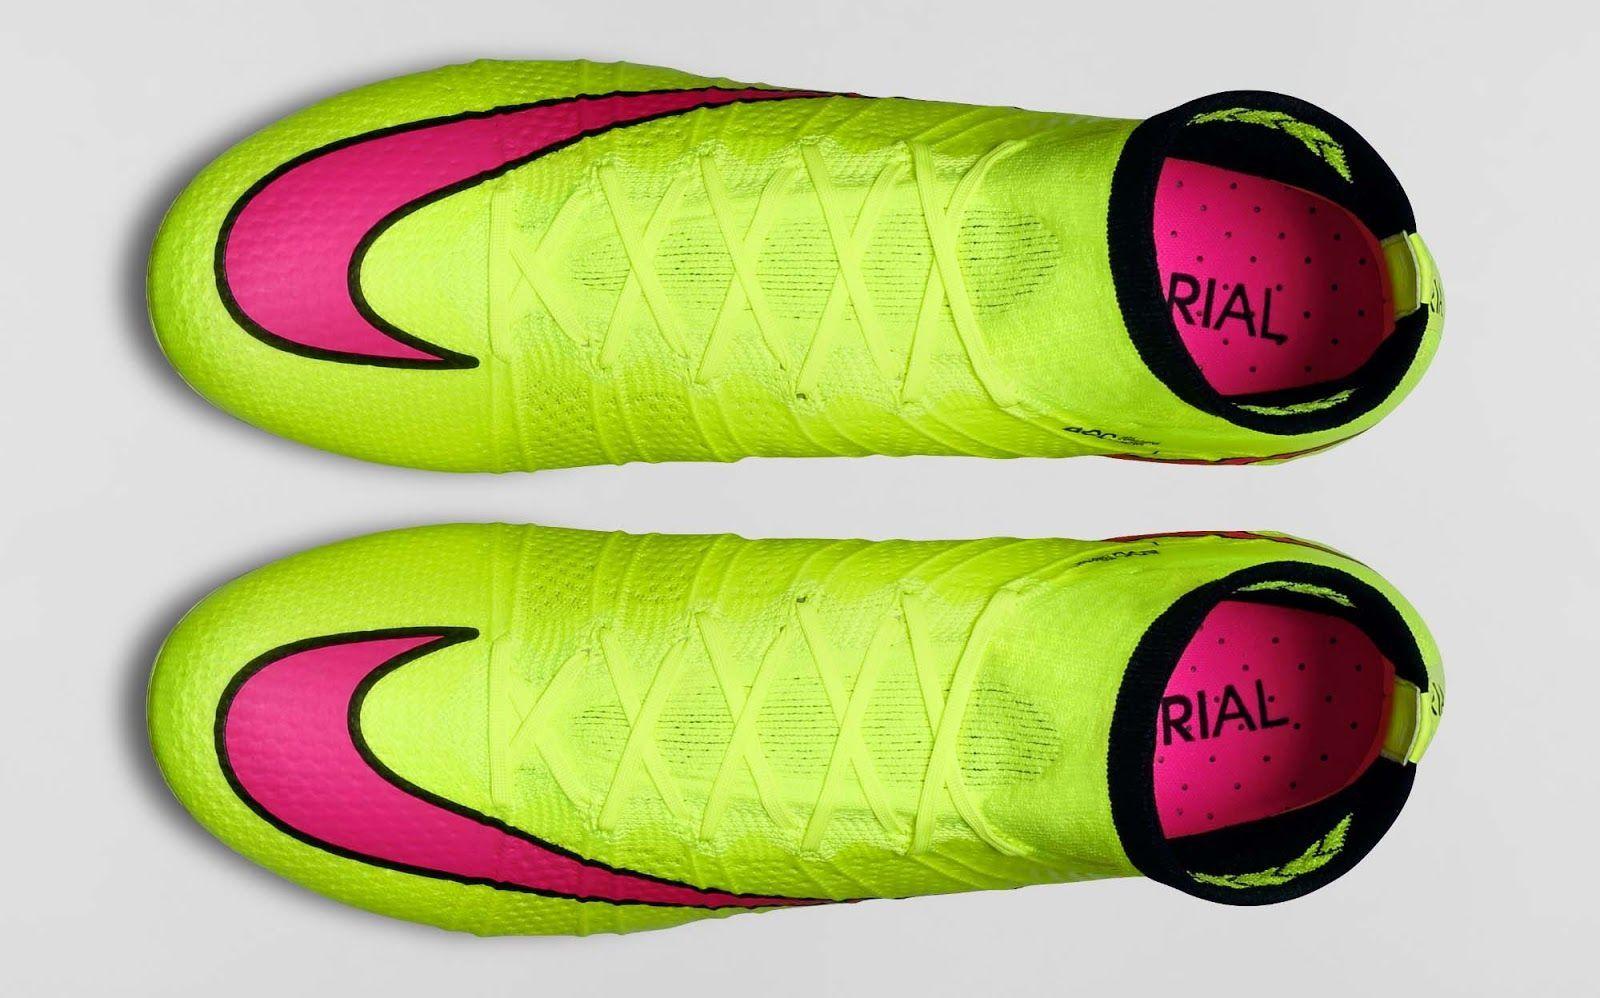 Cristiano Ronaldo Trains in Old Nike Mercurial Superfly Boots